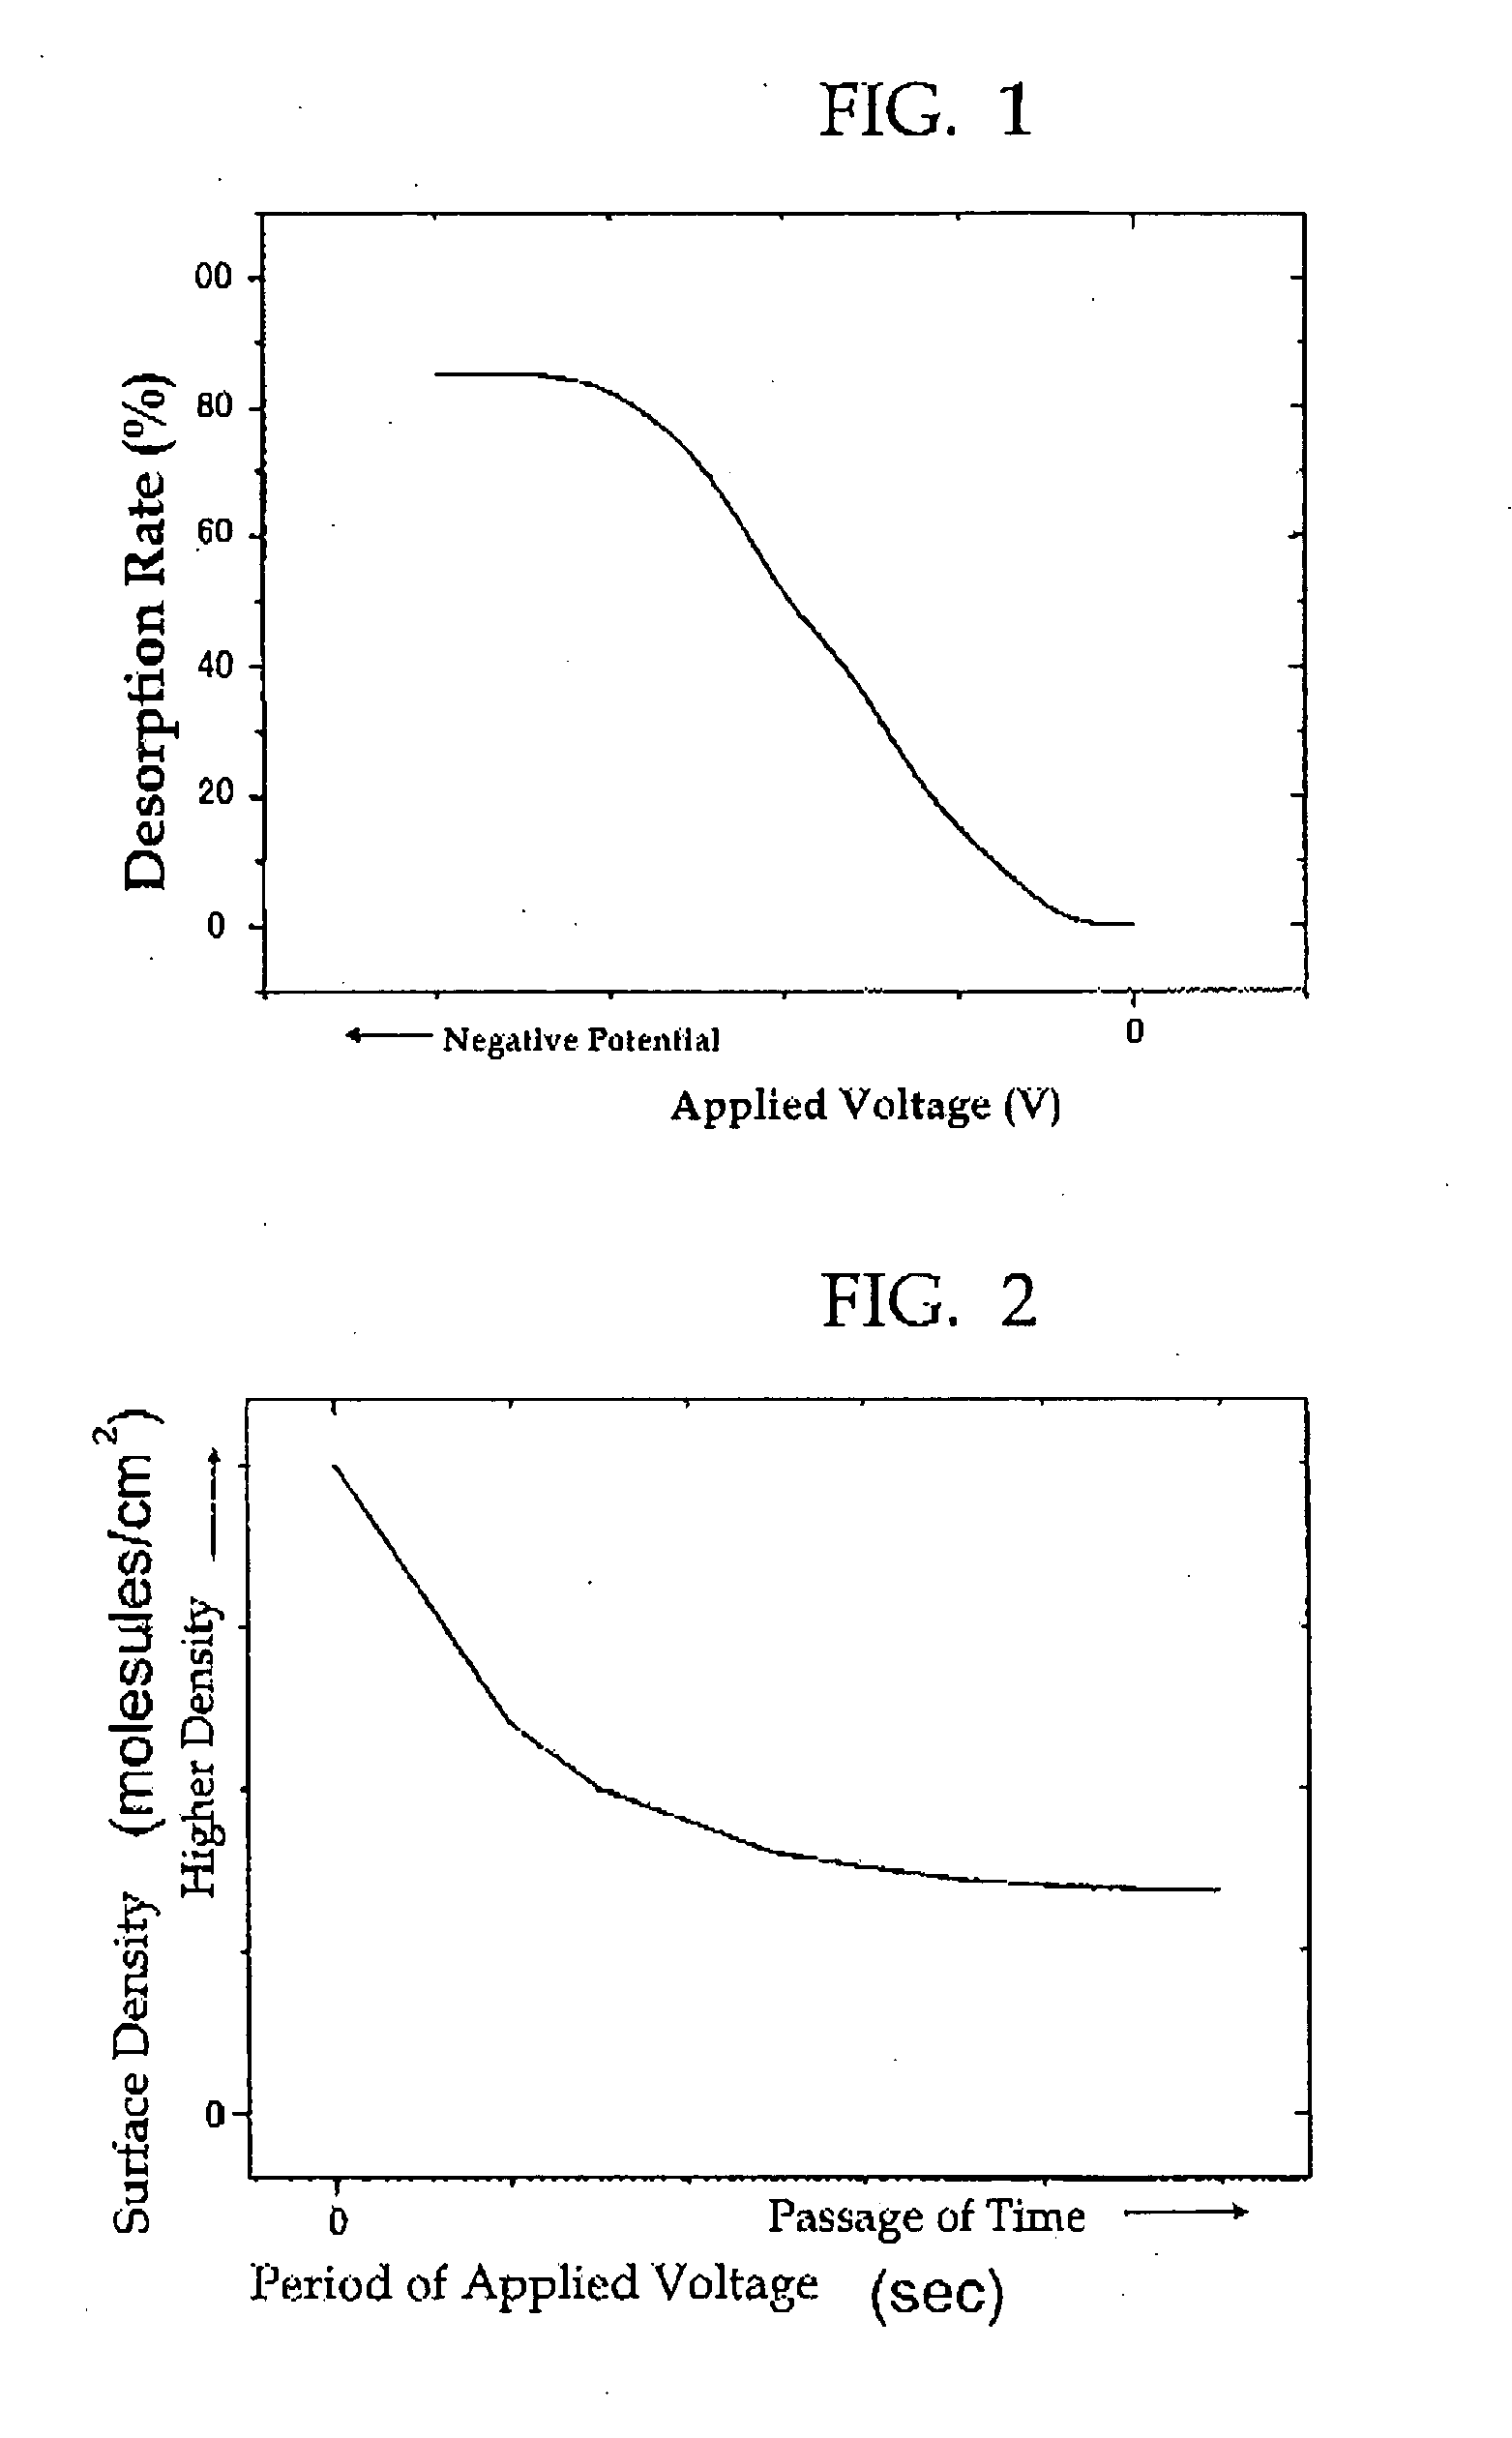 Method and apparatus for producing a molecular film with an adjusted density